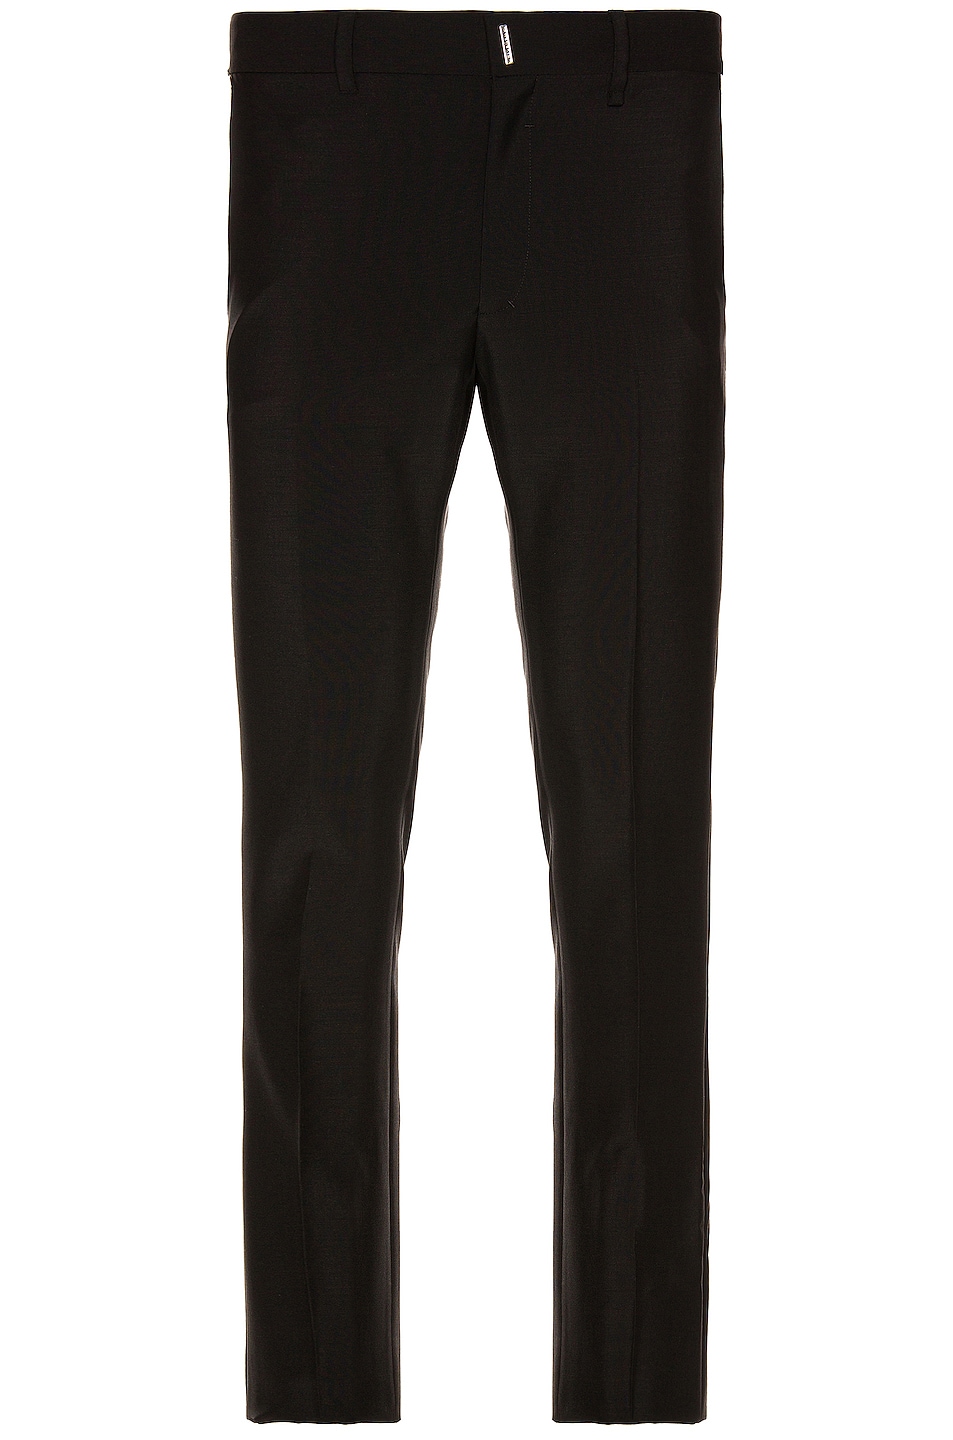 Image 1 of Givenchy Classic Fit Trousers in Black & Silvery